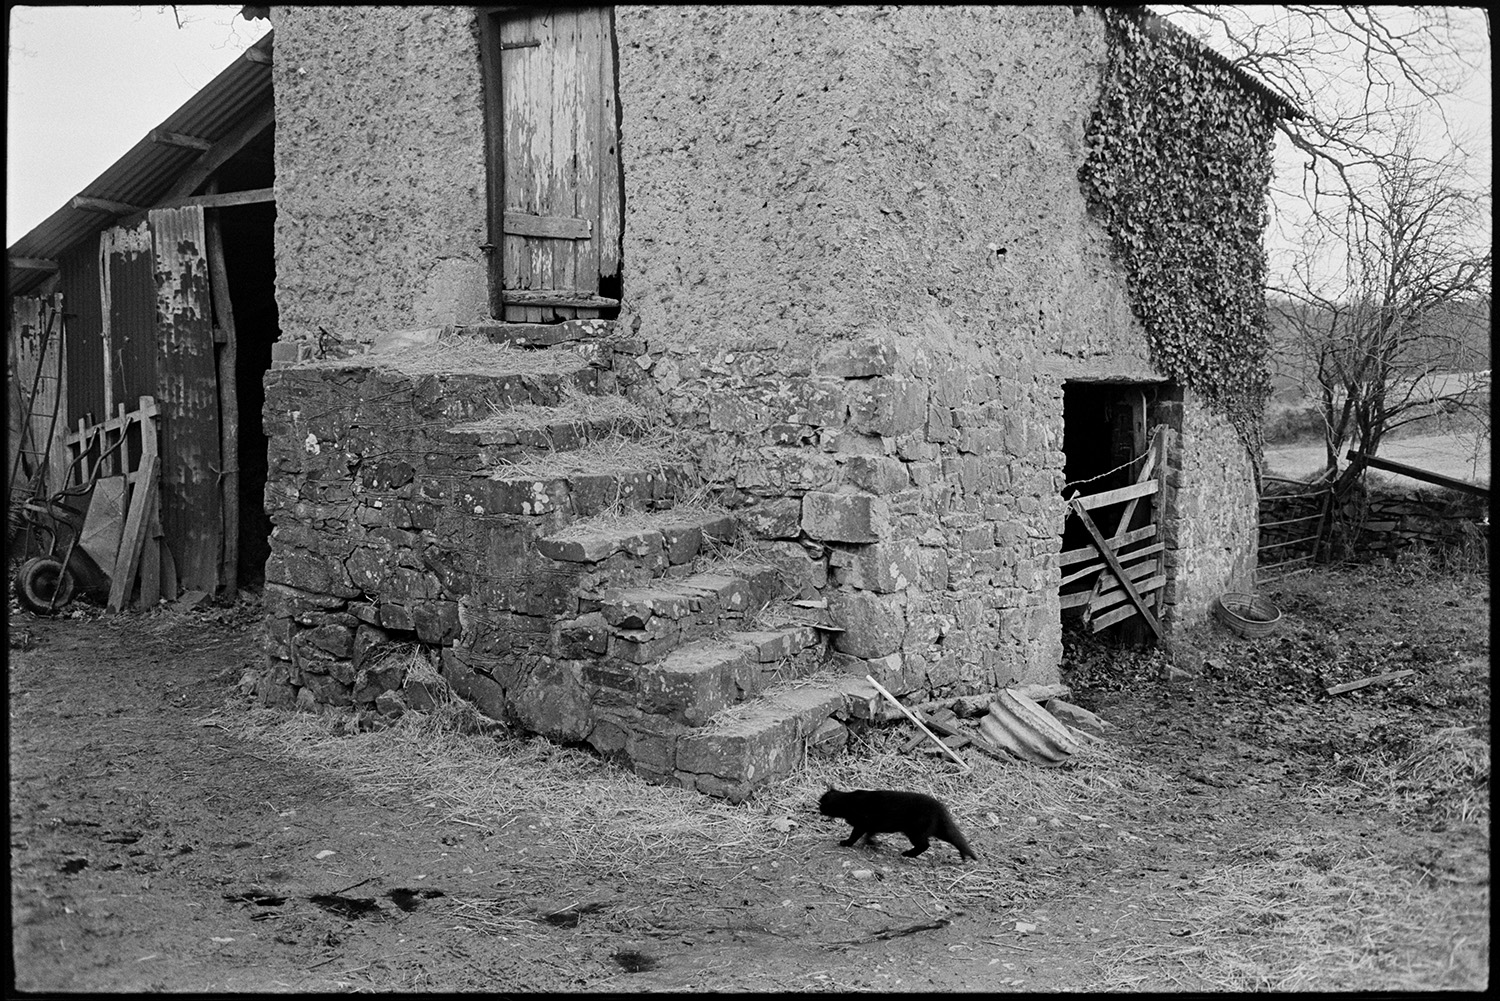 Farmyard, barn granary, farmer with cows and chickens. 
[A cat walking past the stone steps leading up to a stone and cob granary. The entrance to the lower half of the granary has a field gate and ivy is growing up the wall. A corrugated iron lean-to is fixed to the other side of the barn.]